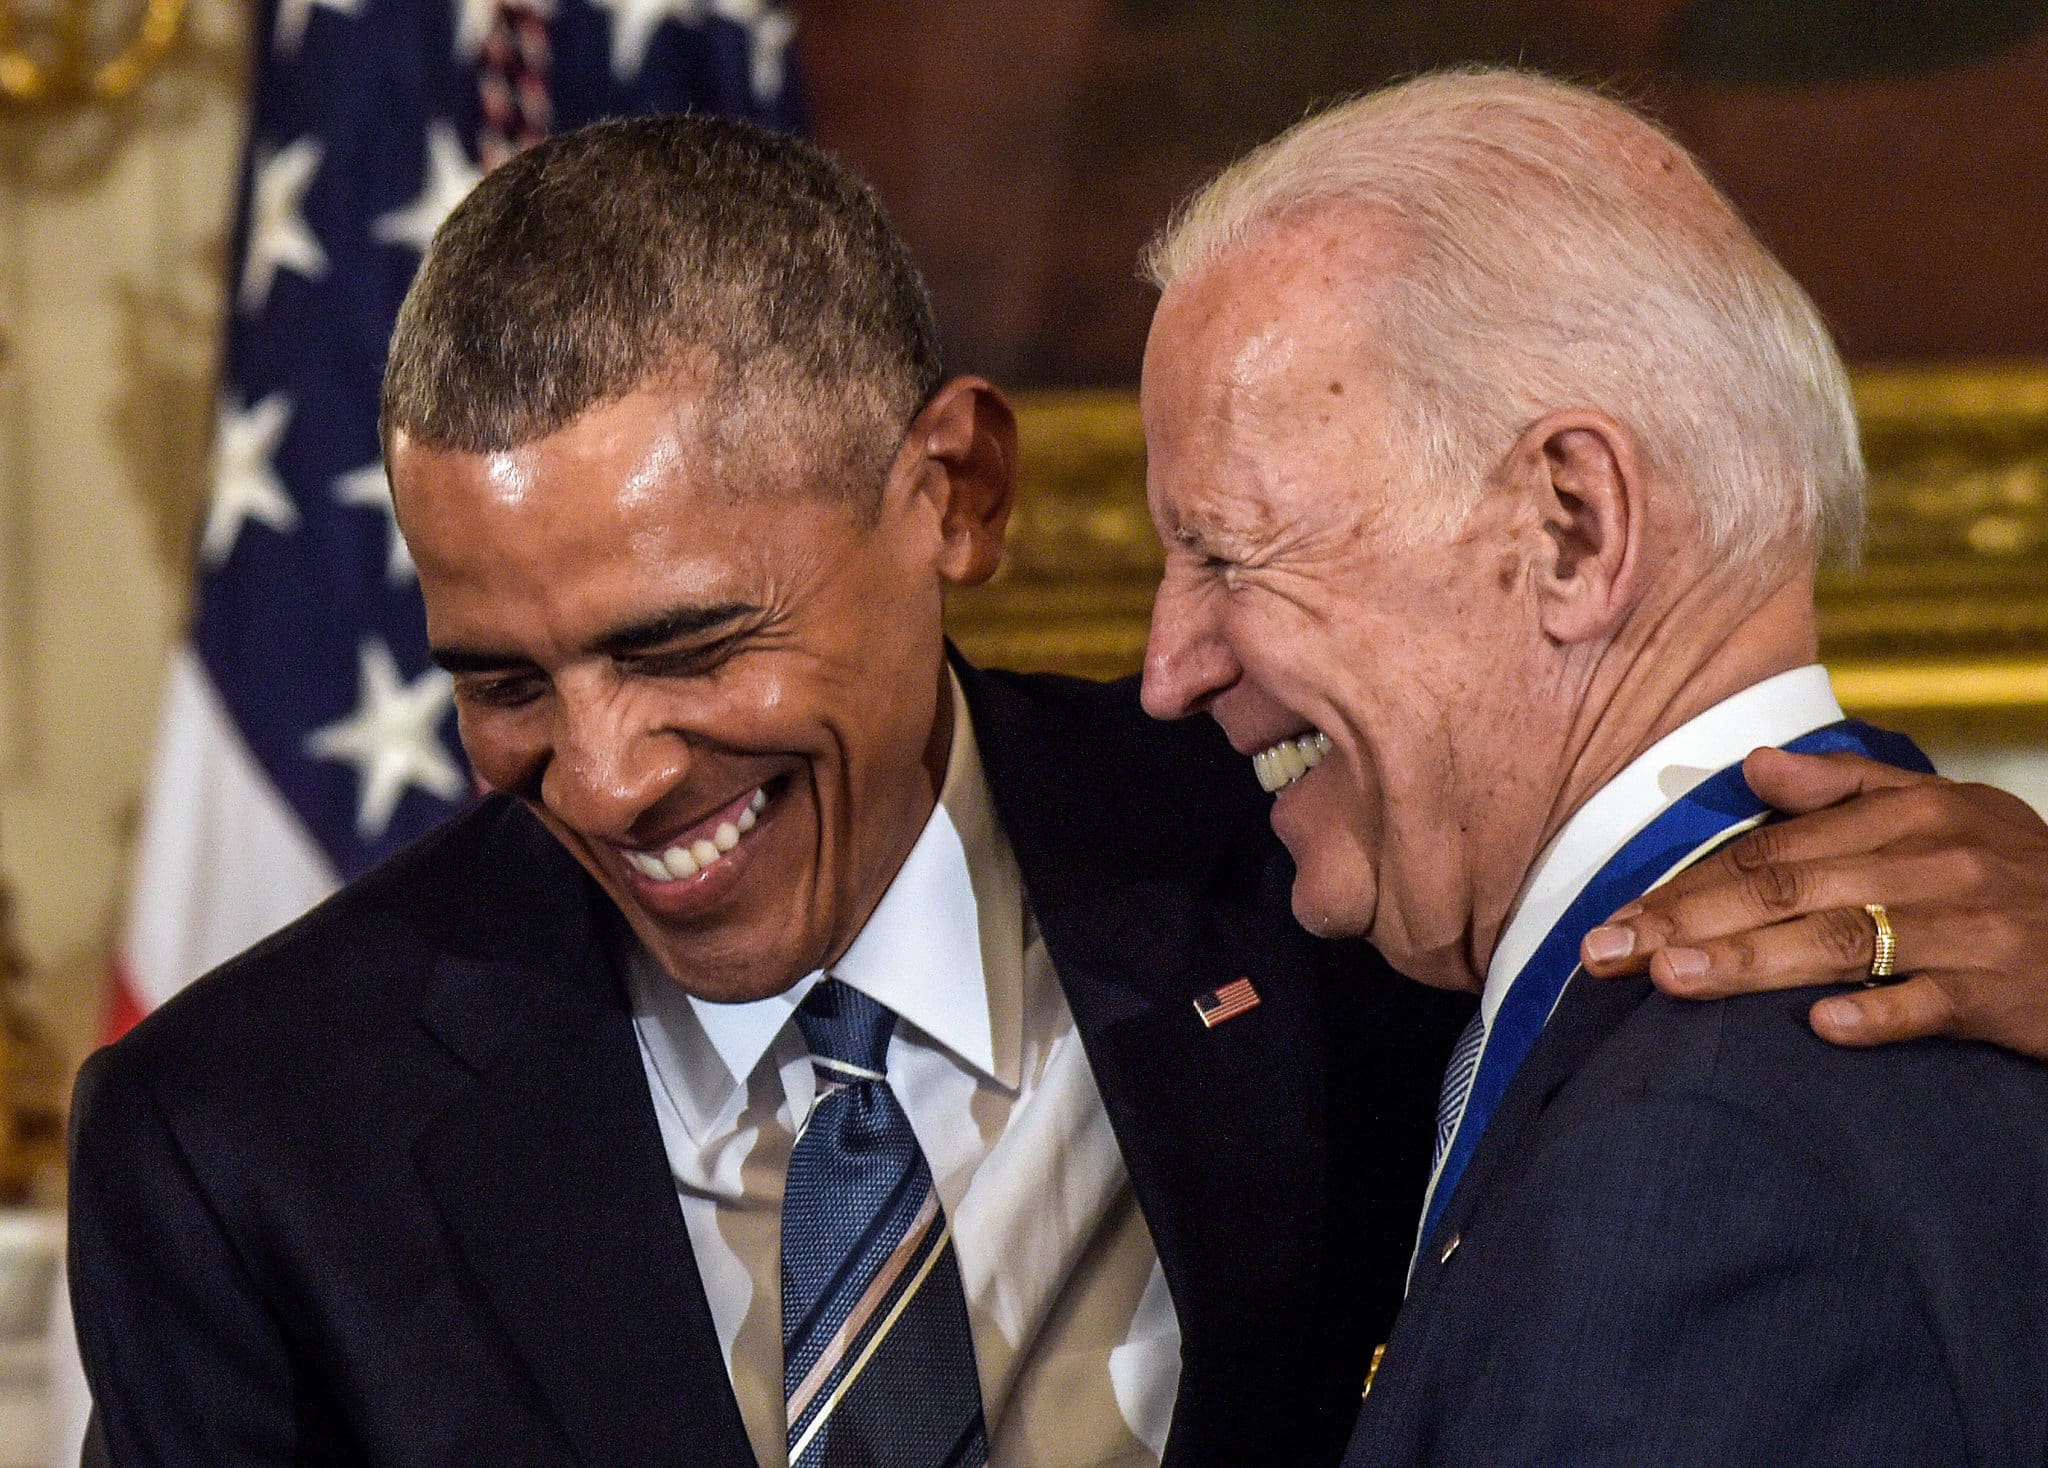 ”joe-biden-officially-breaks-barack-obamas-record-for-getting-the-most-popular-votes-in-history”